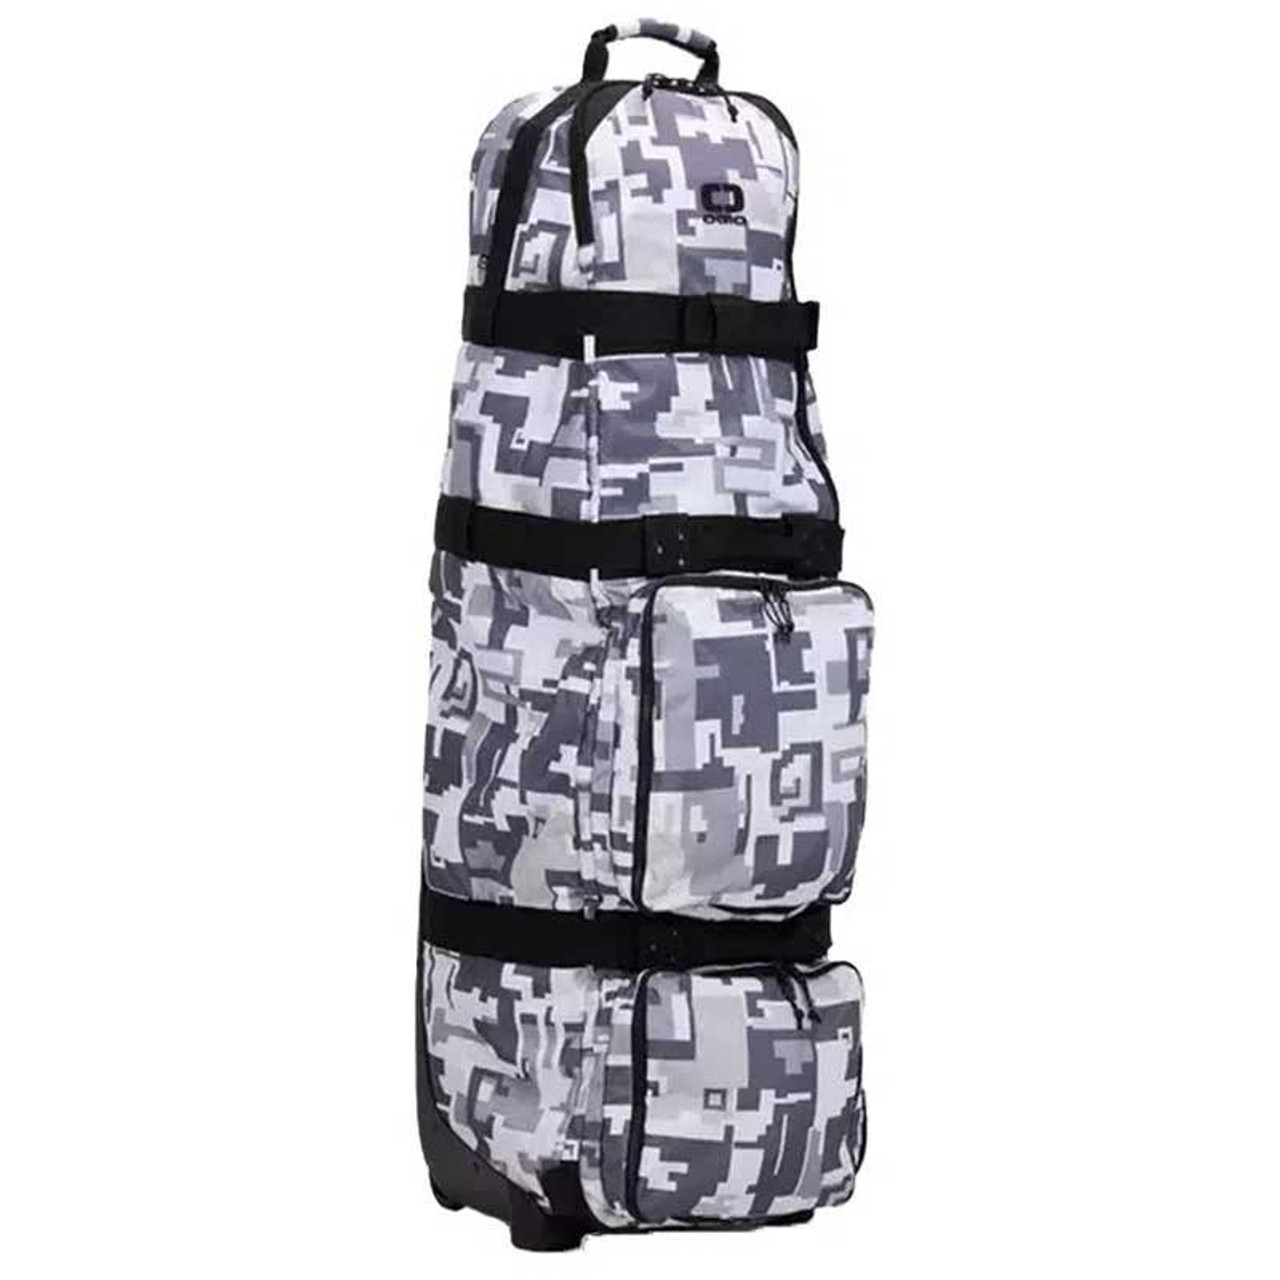 Buy Prokick Cyber Arrow Badminton Kitbag with Shoe Bag, Green-Black Online  at Low Prices in India - Amazon.in